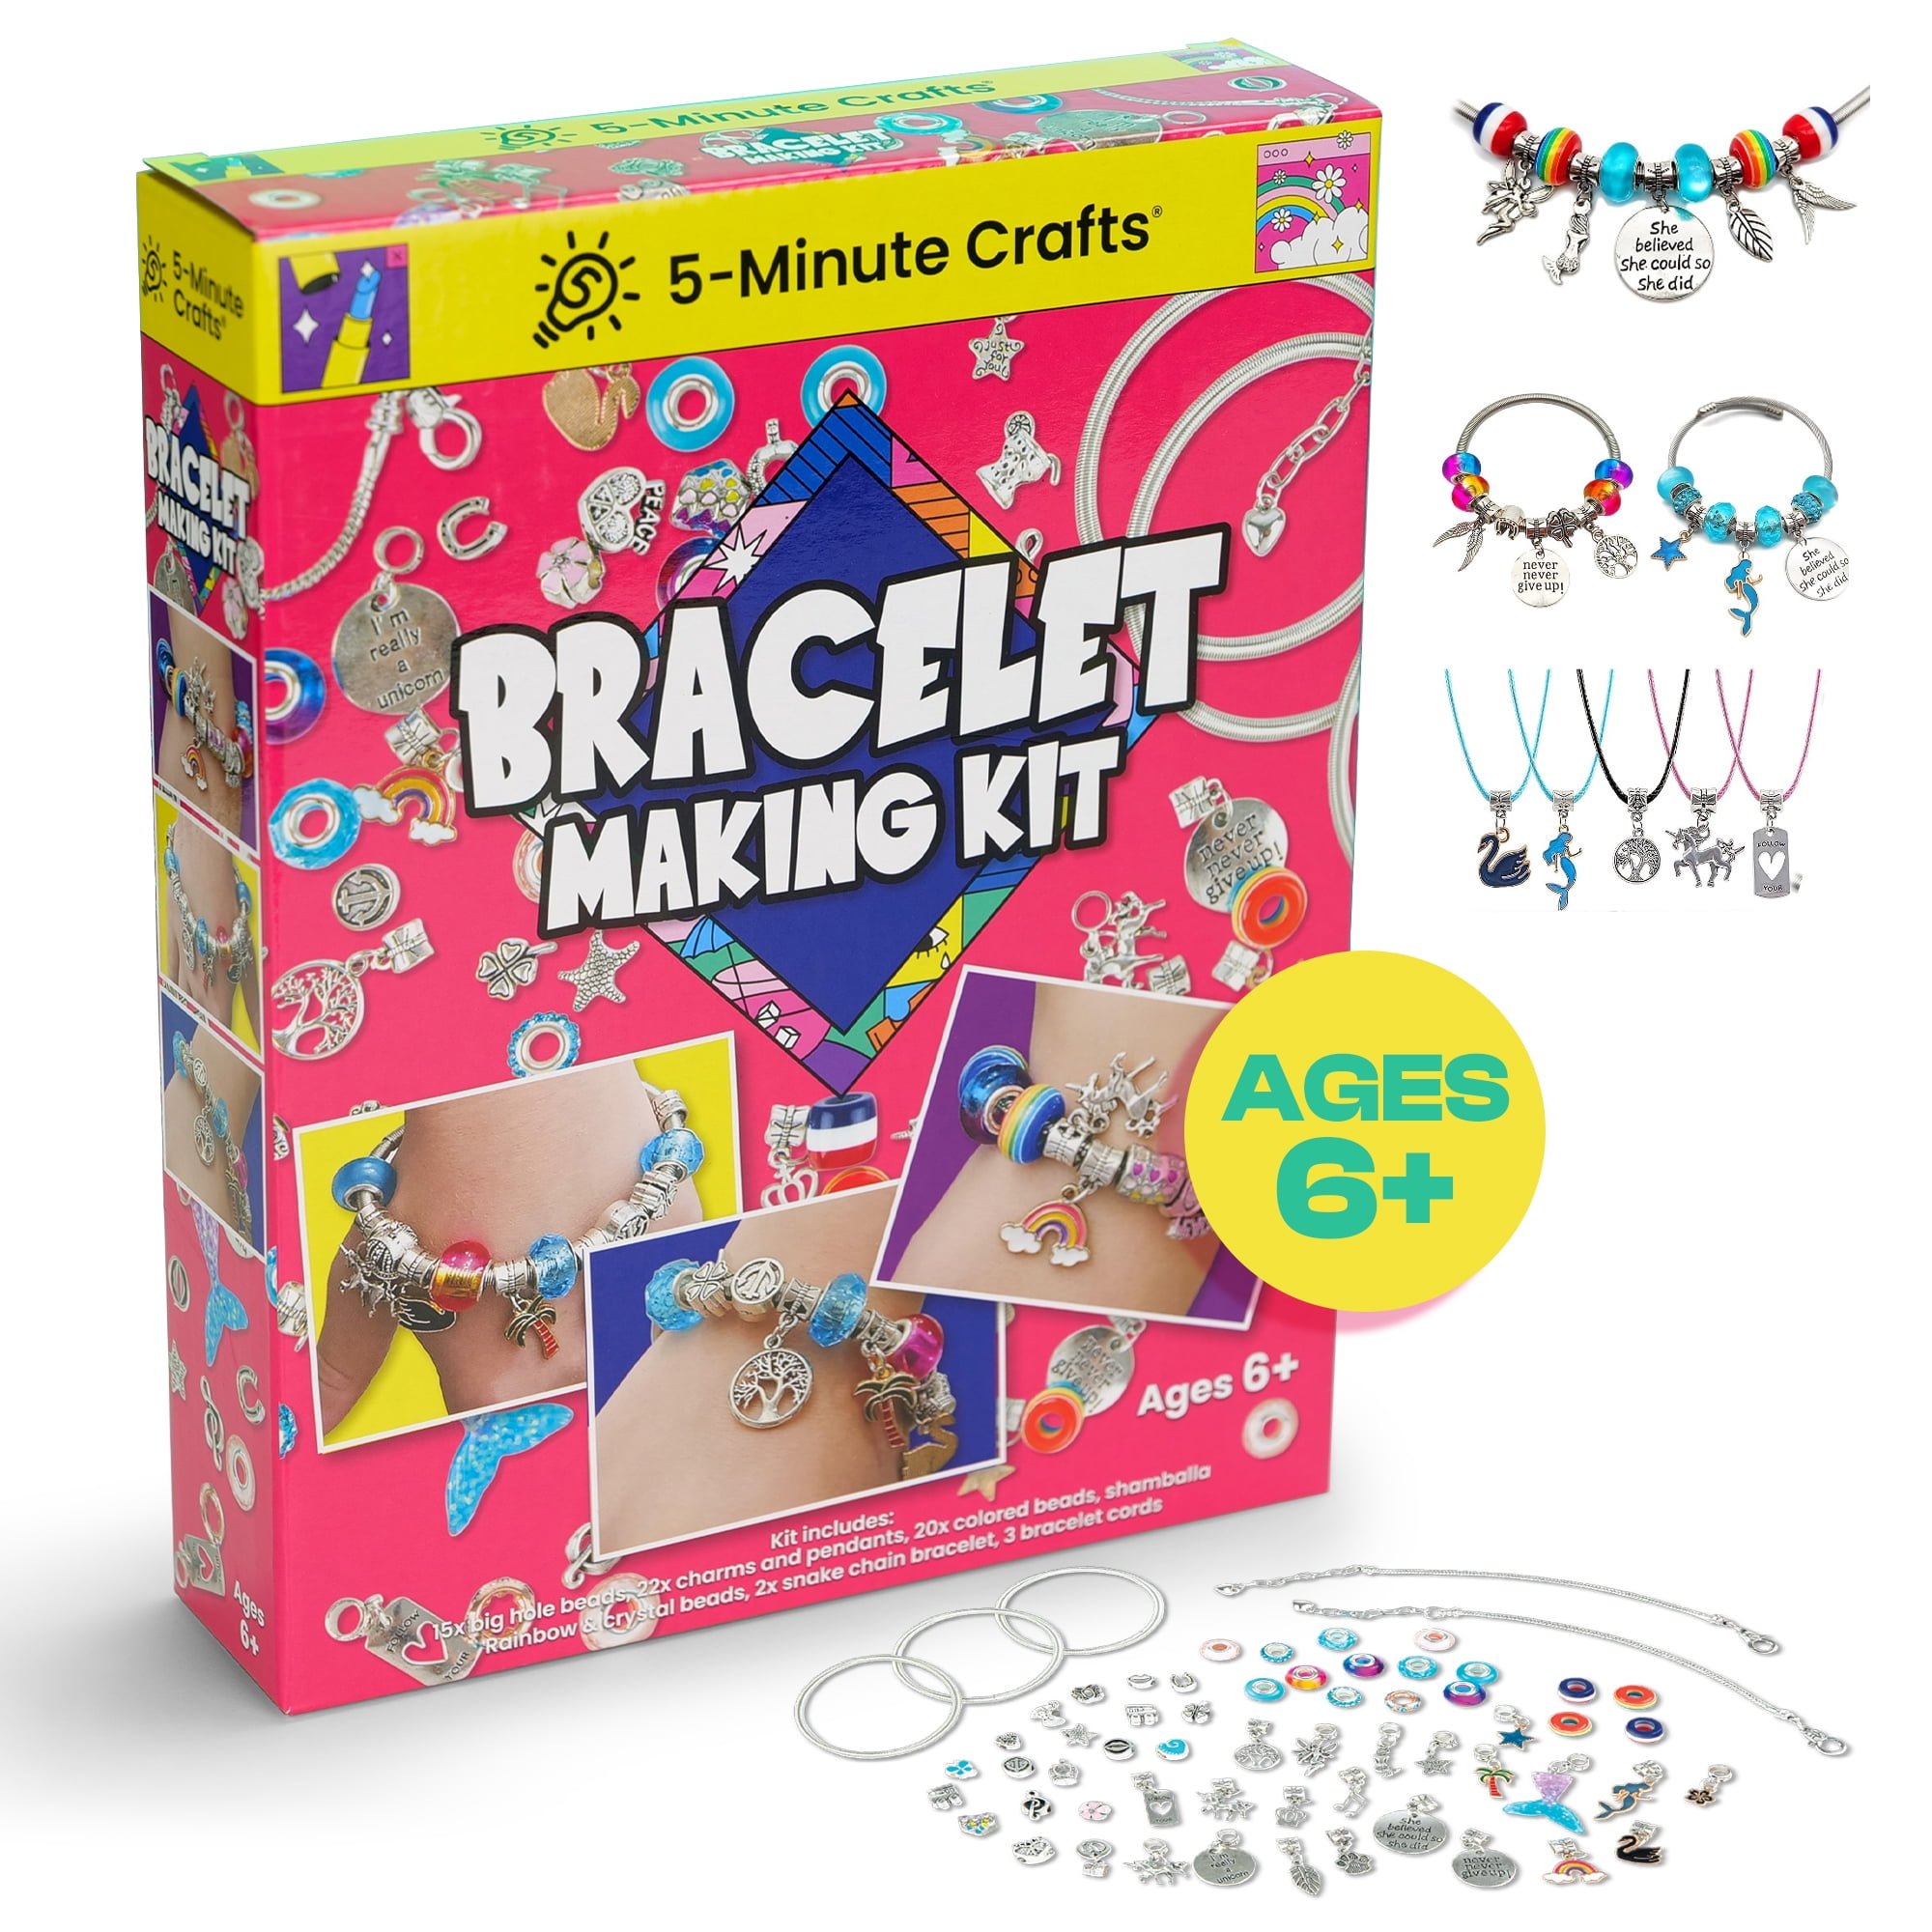 5-Minute Crafts - Bracelet Creating Kit for Ages 6+ As Seen on Social Media